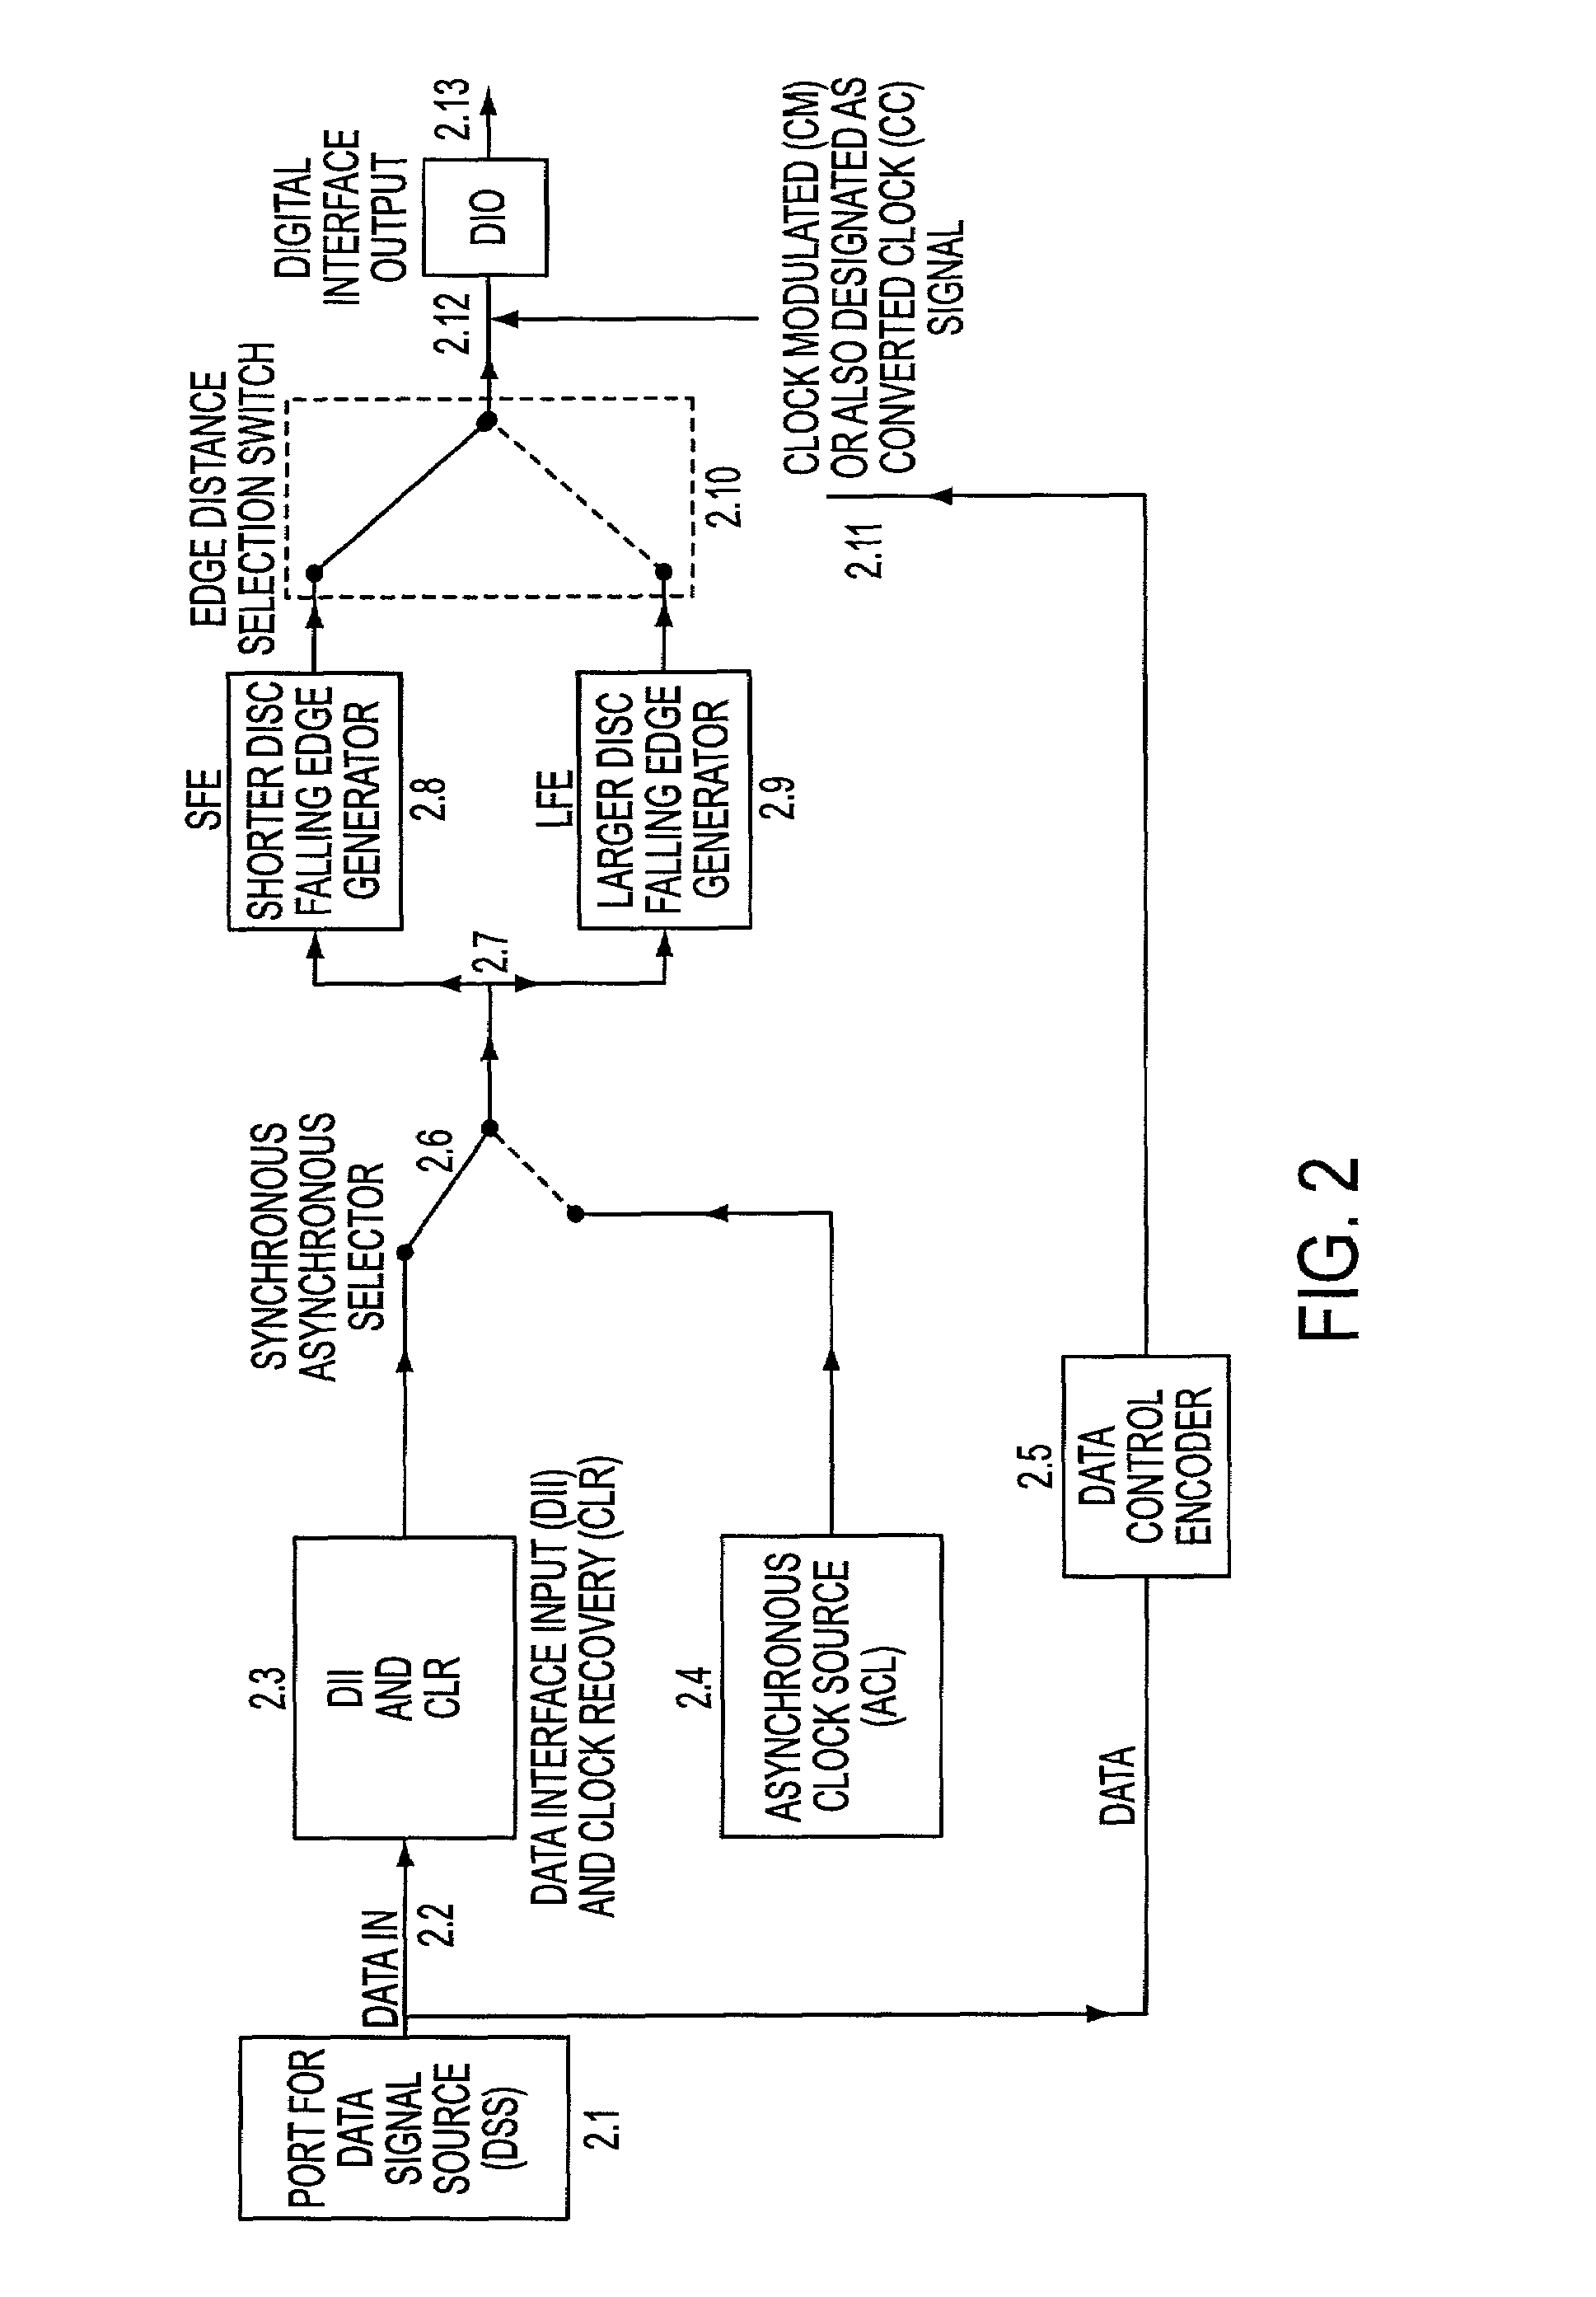 Ultra efficient modulation and transceivers